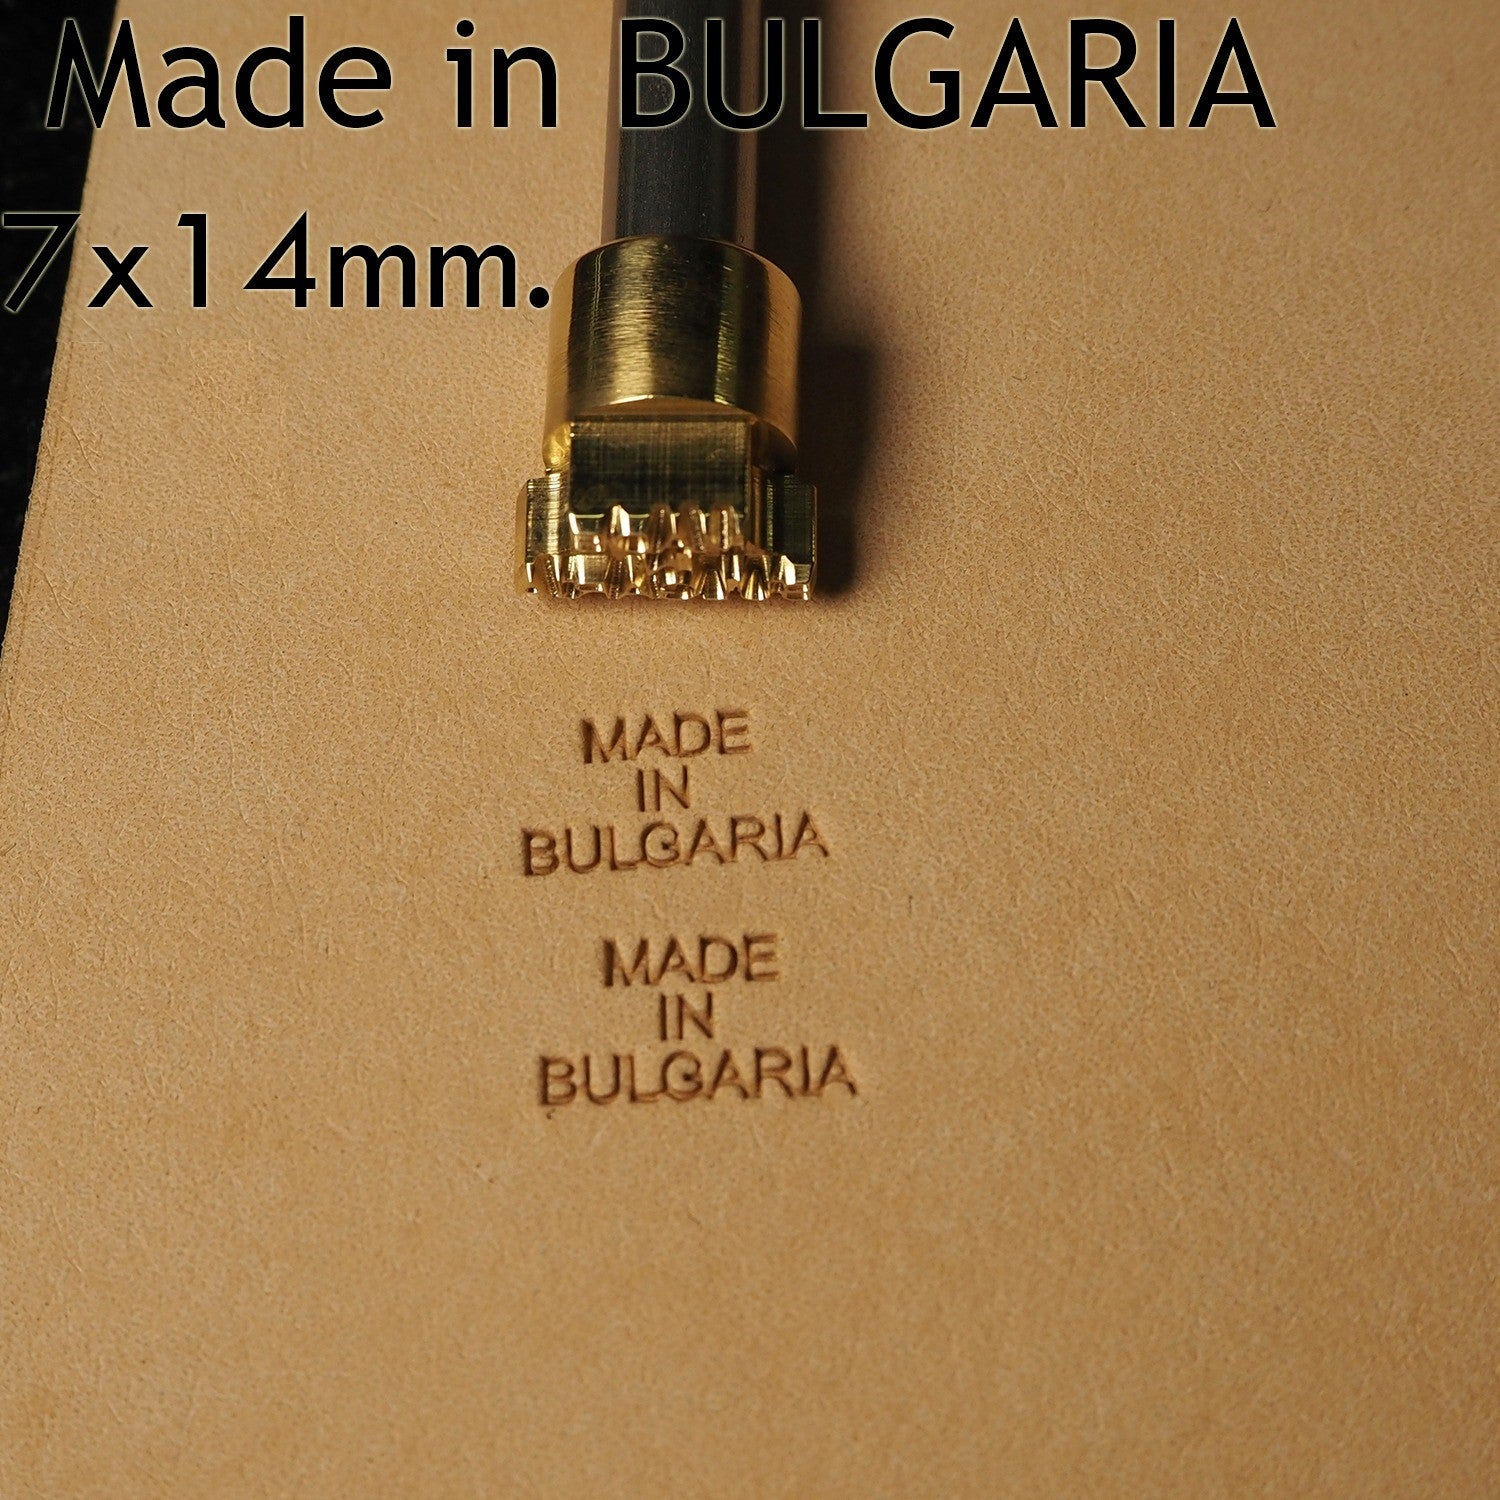 #Made In Bulgaria - Leather Crafting Stamp Tool